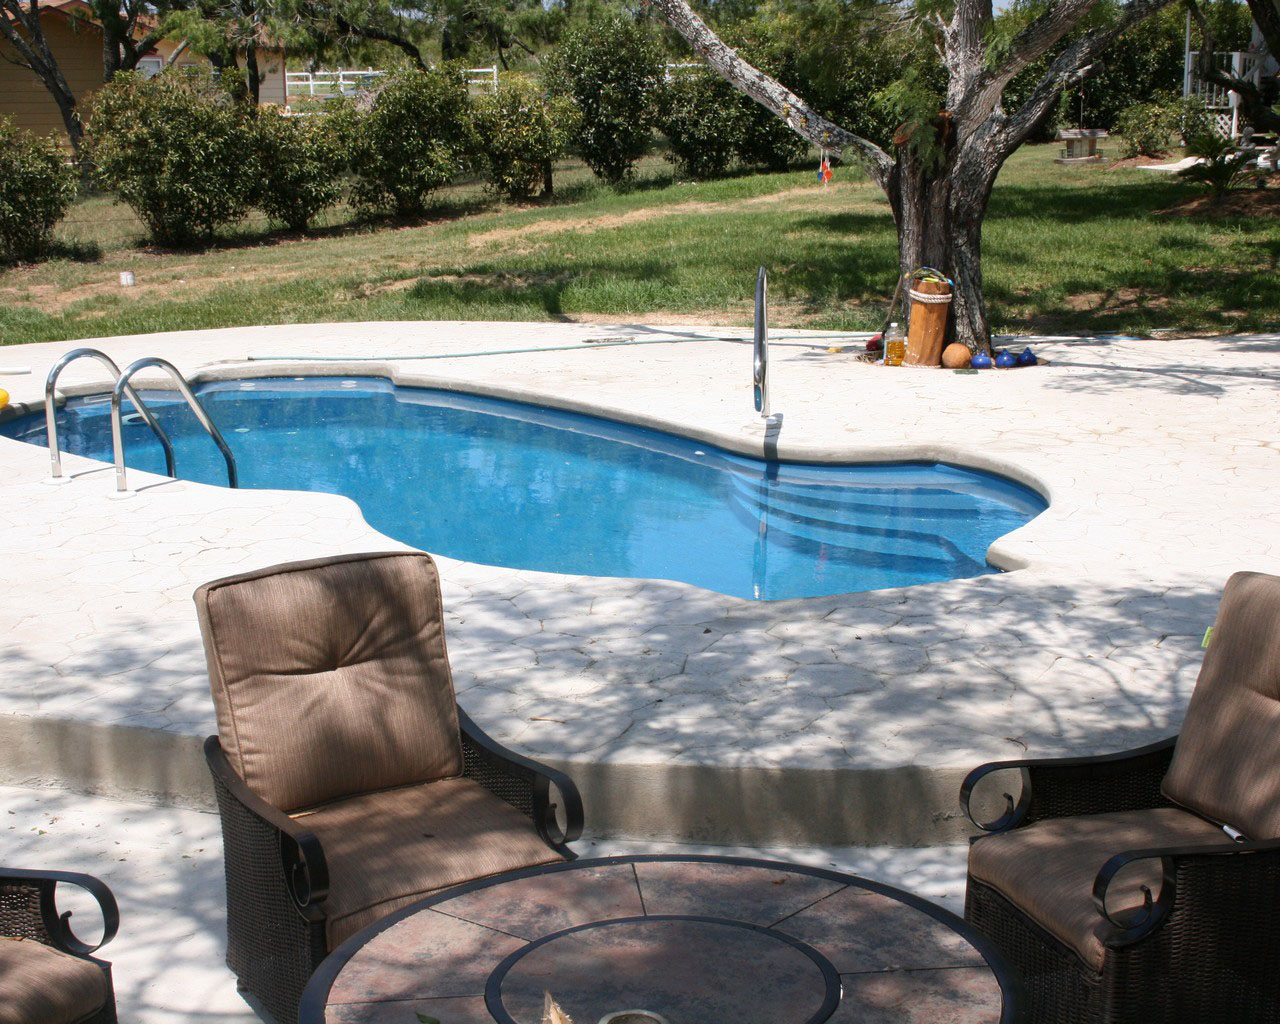 Beautiful Kingsbury pool style by Lonestar Fiberglass pools San Antonio with sublime stamped concrete pool deck, entry bar, and deep end exit ladder